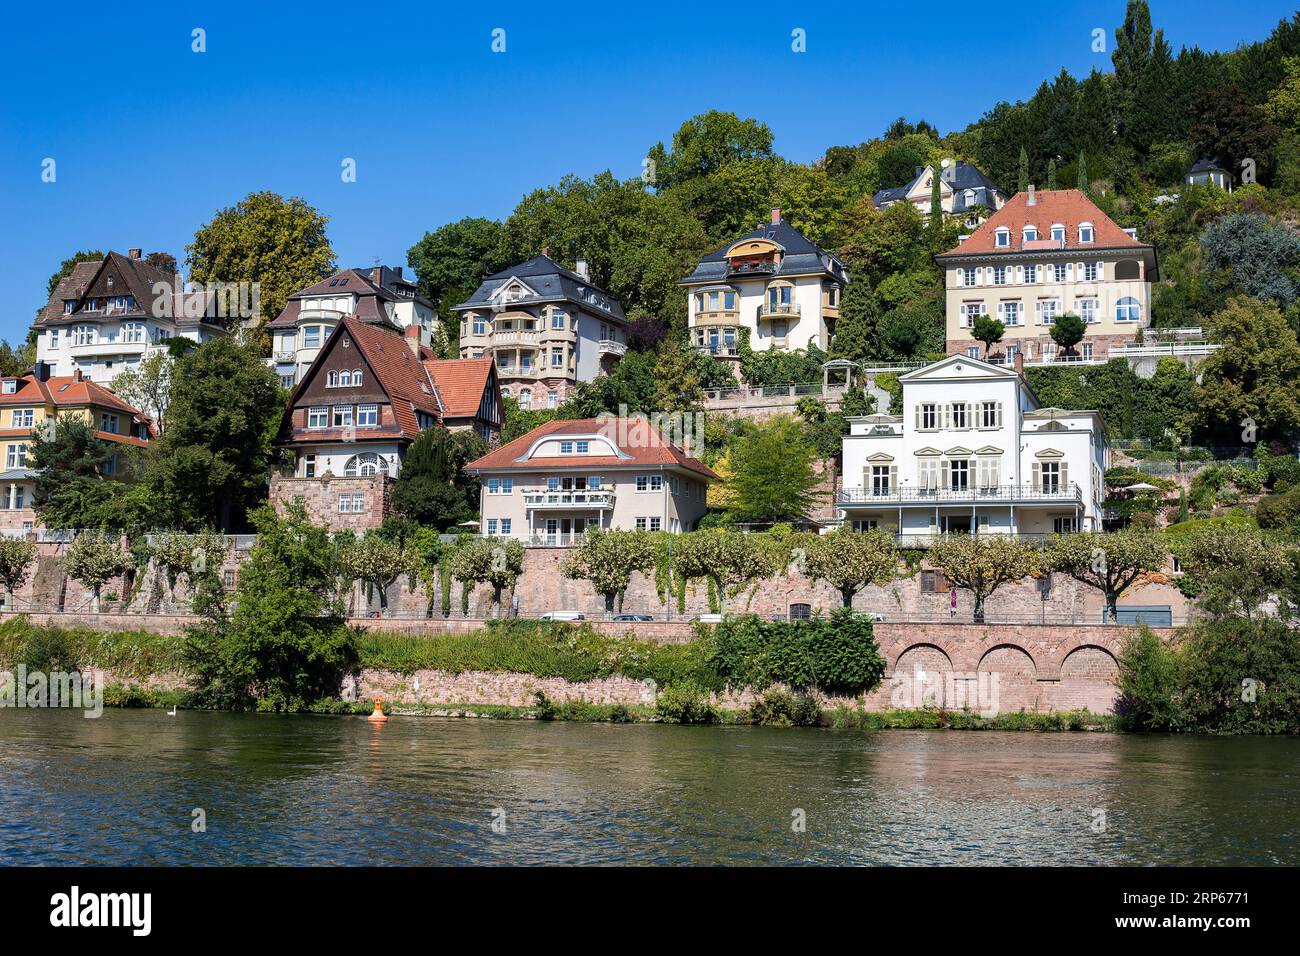 Residential area near the old, famous city of Heidelberg, Germany. View of beautiful houses. Cottages on the river bank. Beautiful nature around. Mode Stock Photo